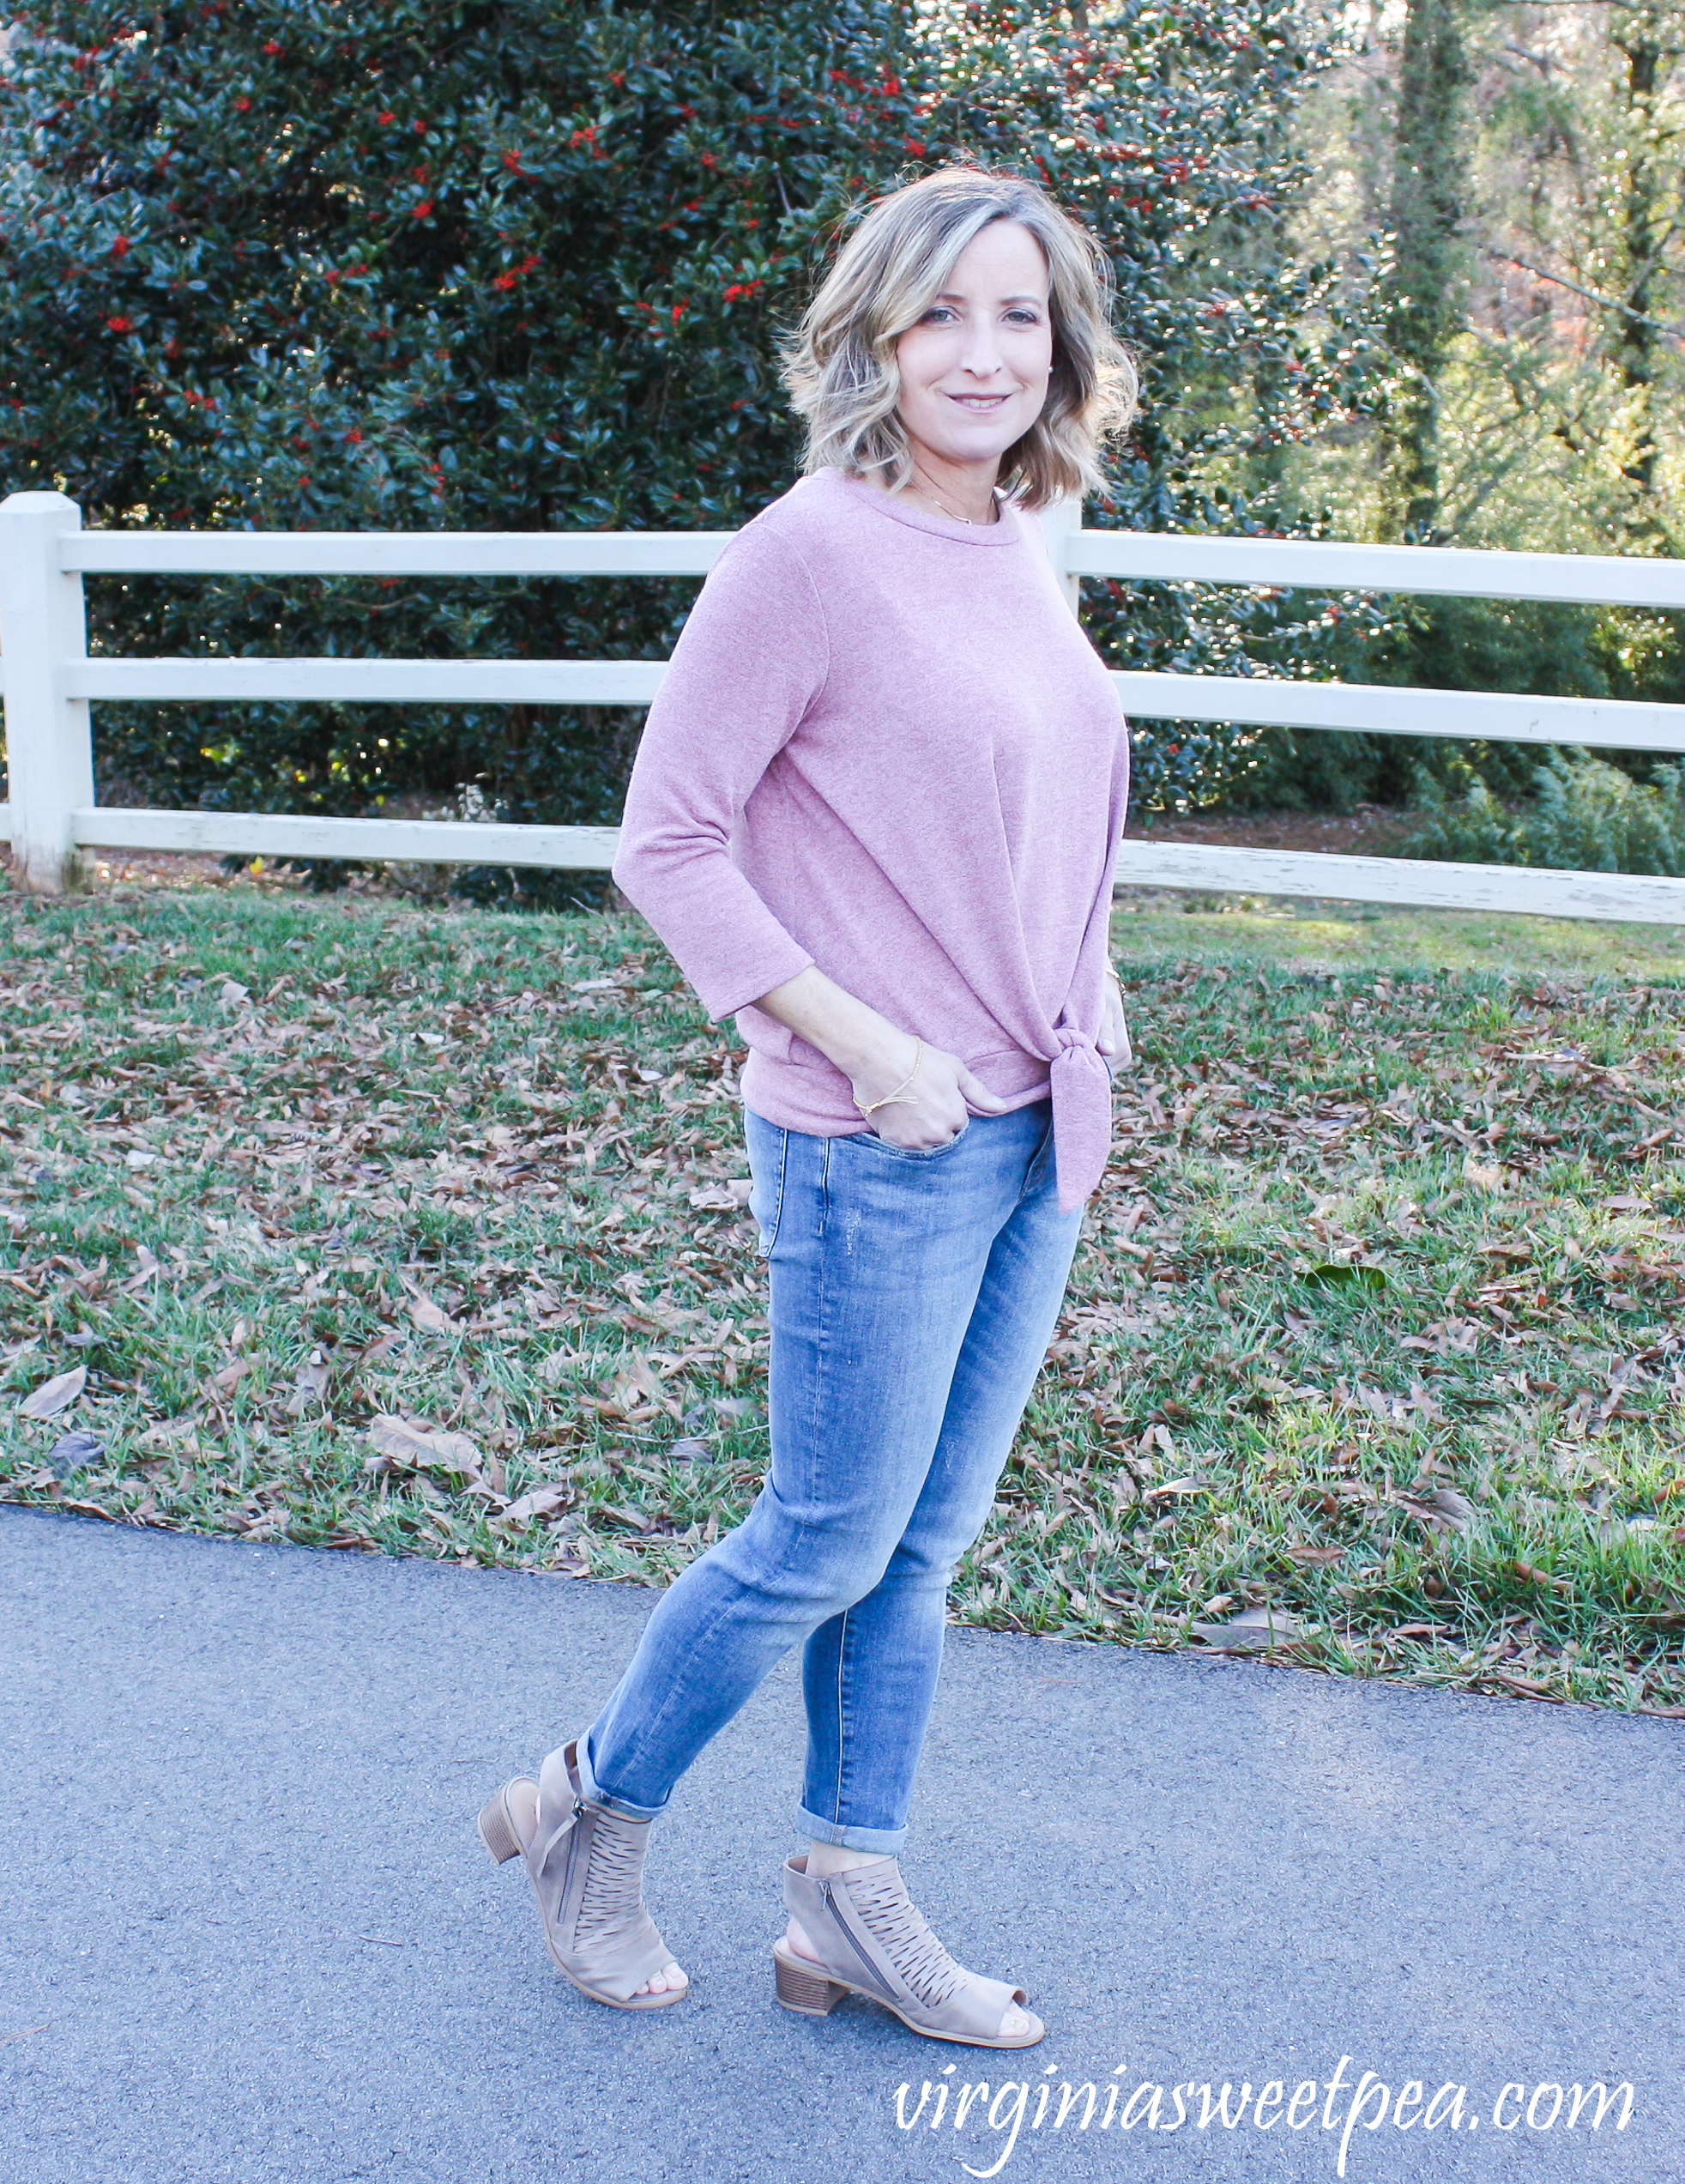 Stitch Fix Review for March 2019 - Warp + Weft Jenny Straight Leg Jean with Kaileigh Francine Tie Front Knit Top #stitchfix #stitchfixreview #stitchfix2019 #stitchfixspring #stitchfixjeans